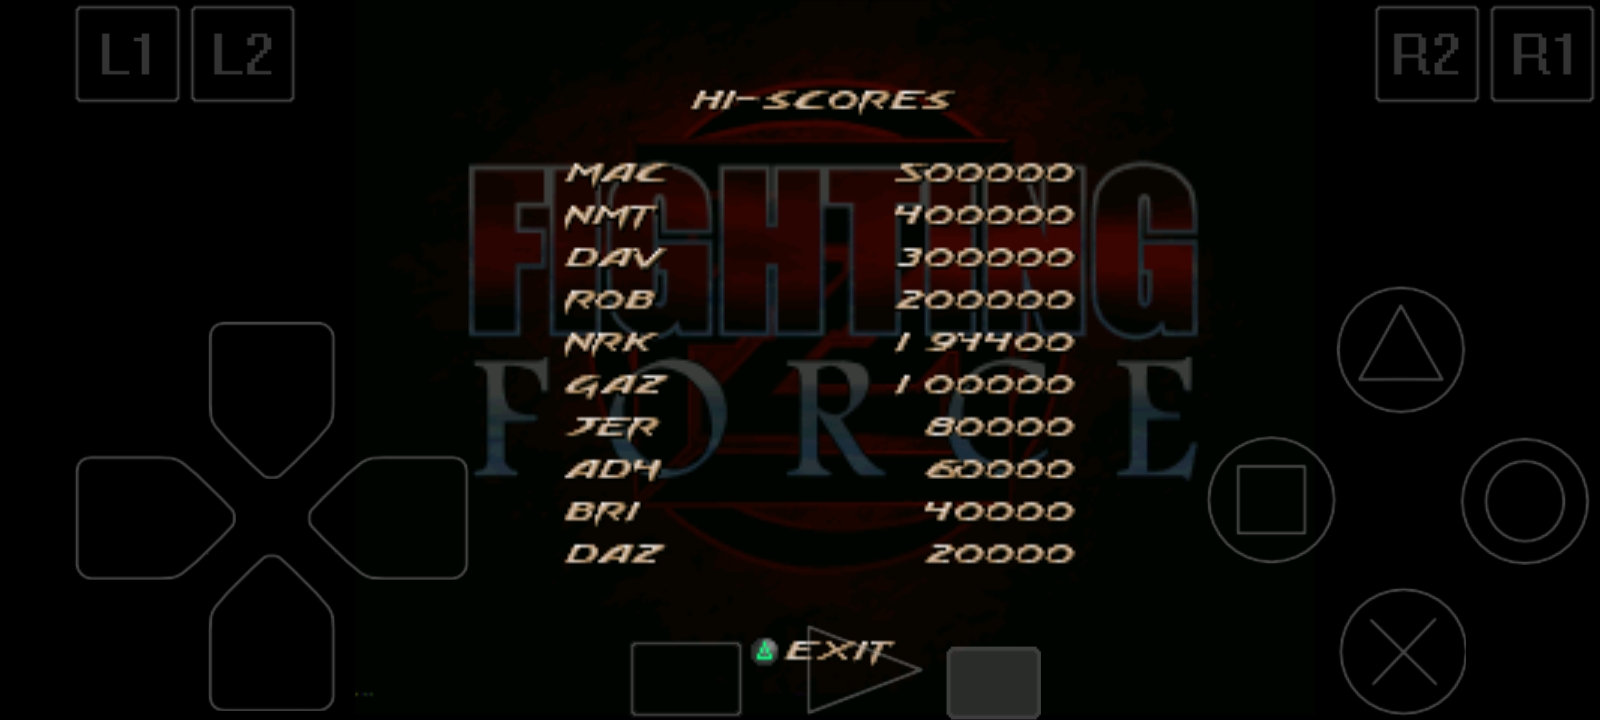 Hauntedprogram: Fighting Force [Easy] (Playstation 1 Emulated) 194,400 points on 2022-07-07 17:58:24